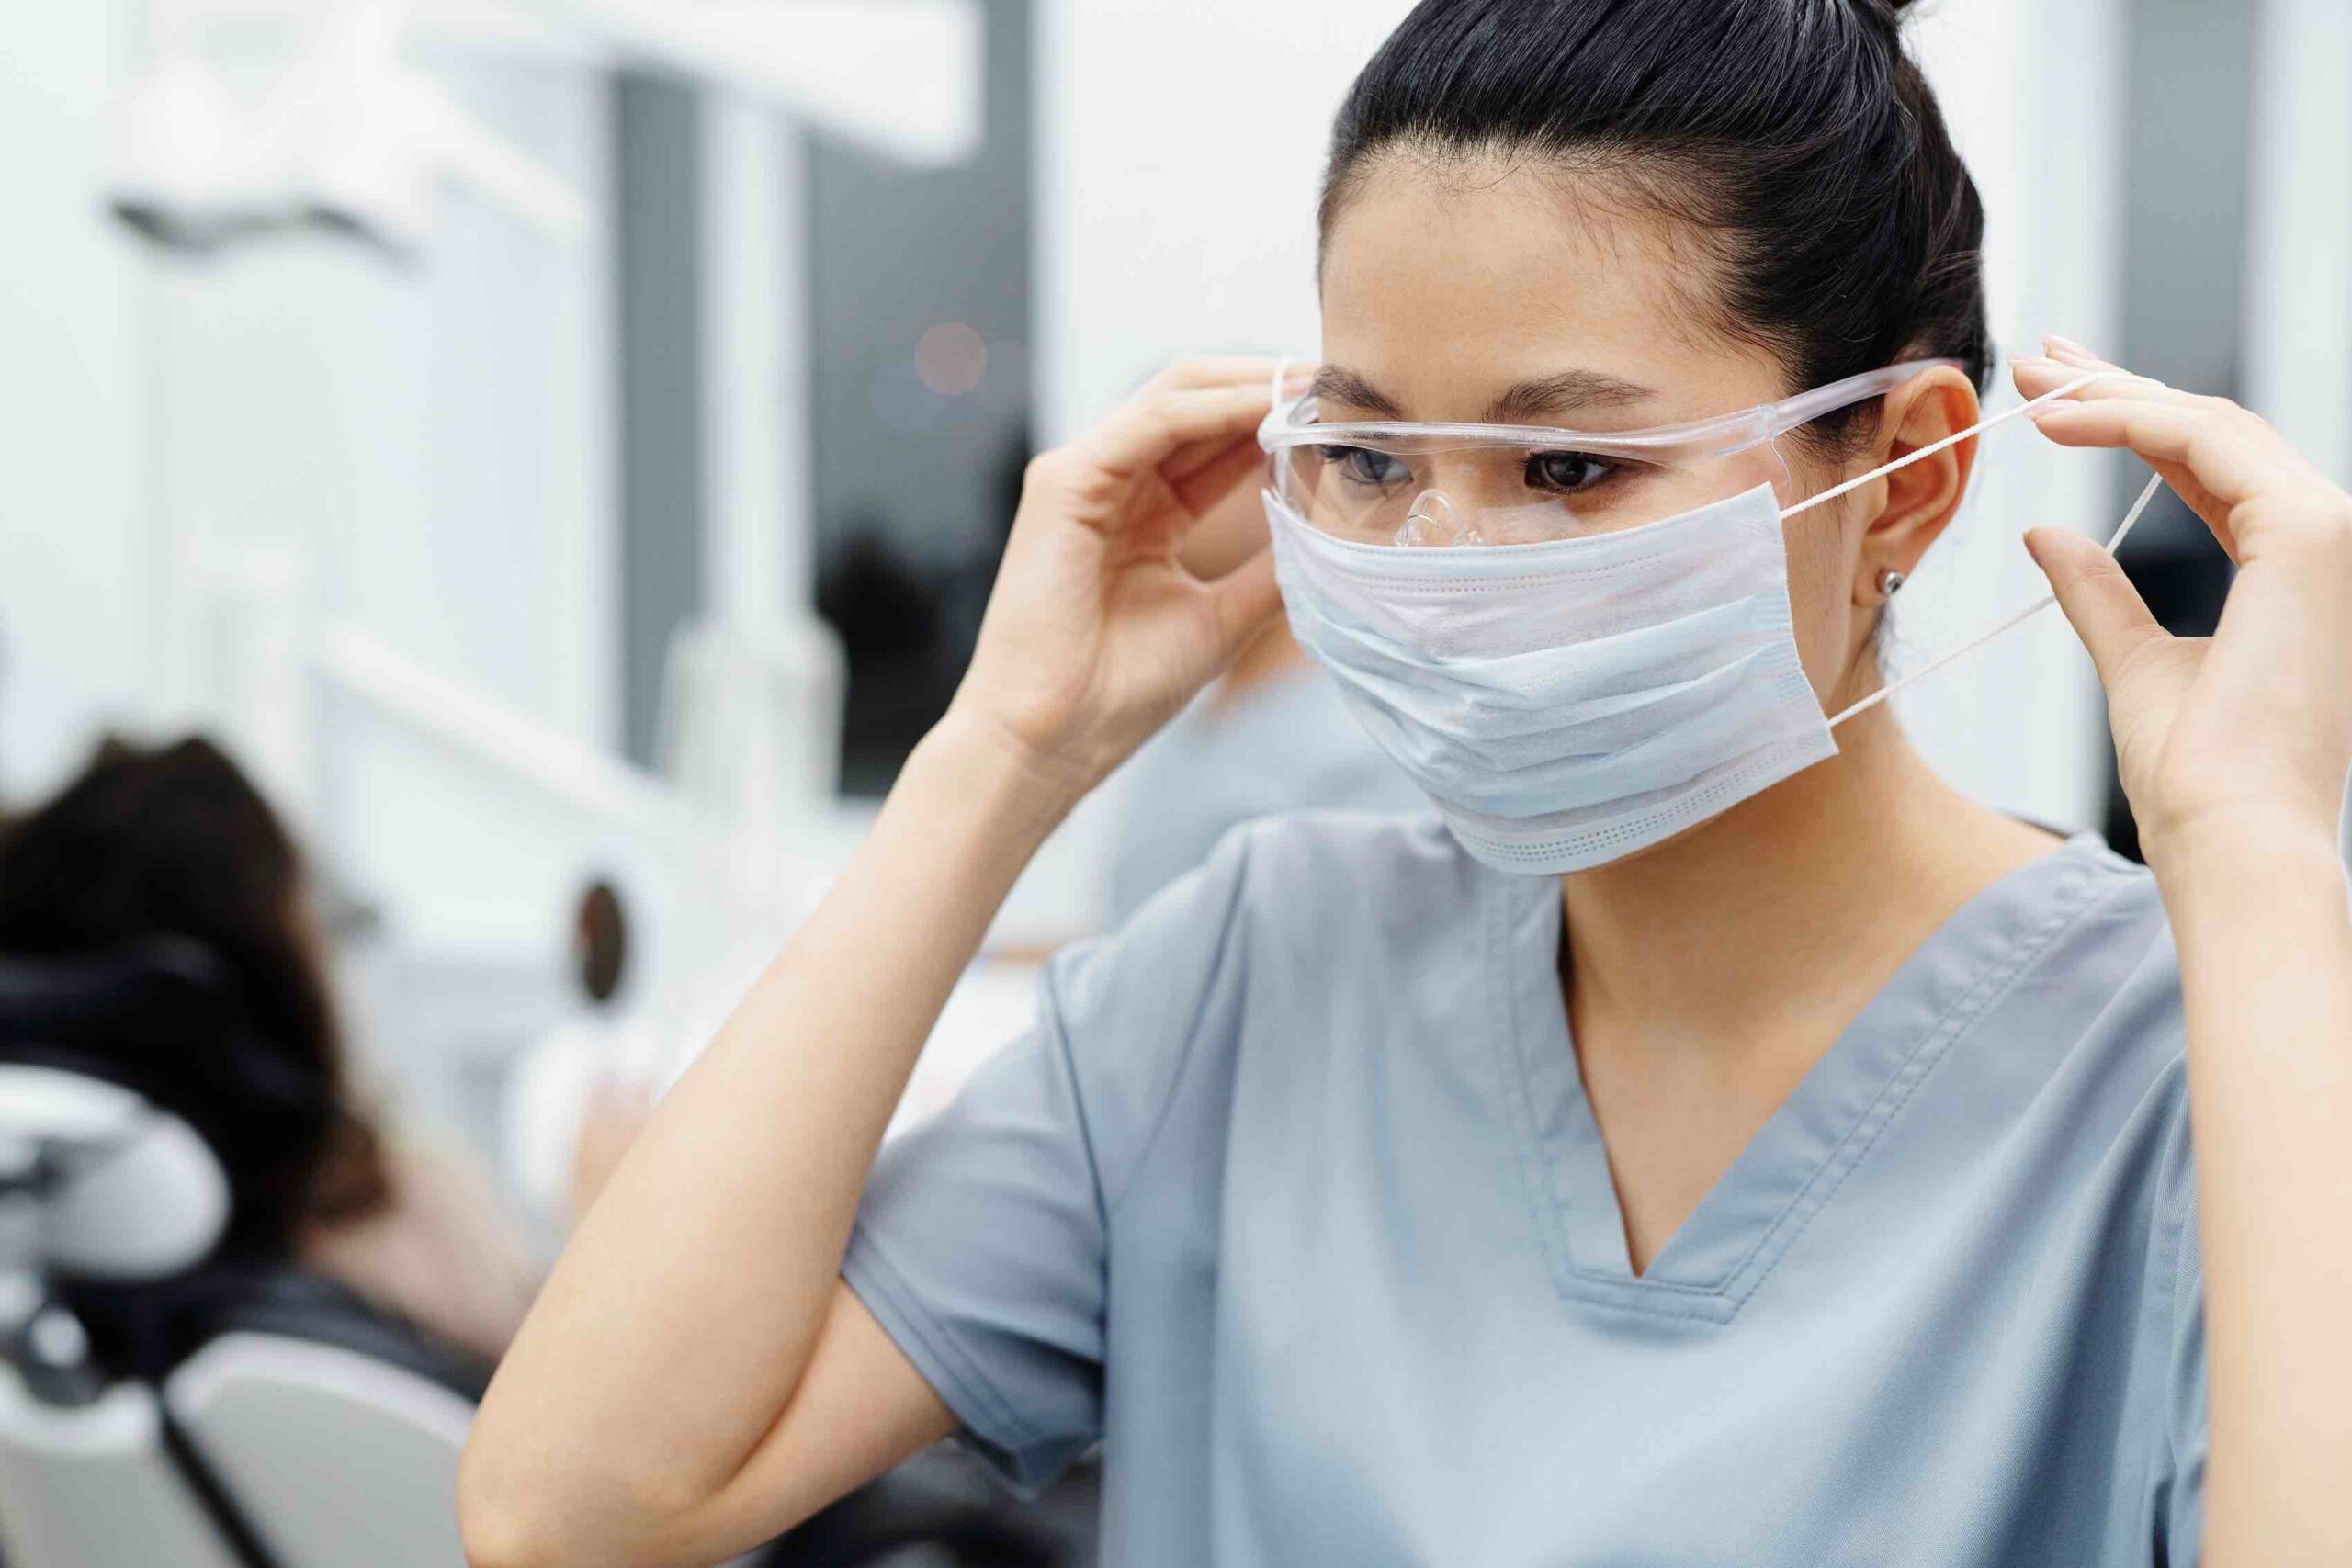 A registered nurse preparing to work in an environment where hygiene is a top priority